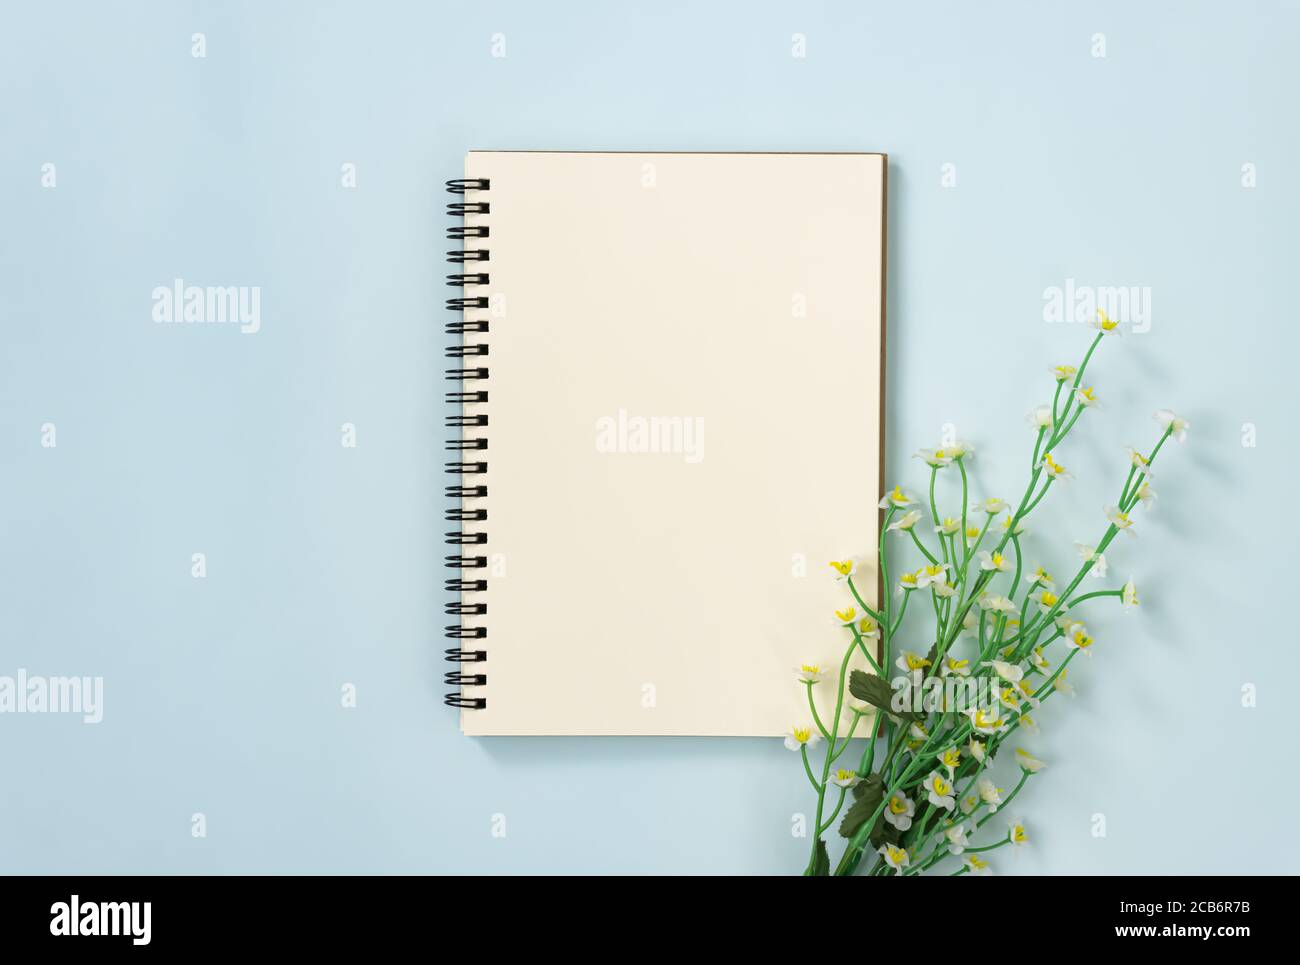 Spiral Notebook or Spring Notebook in Unlined Type and White Daisy Flowers at Bottom Right on Blue Pastel Minimalist Background Stock Photo